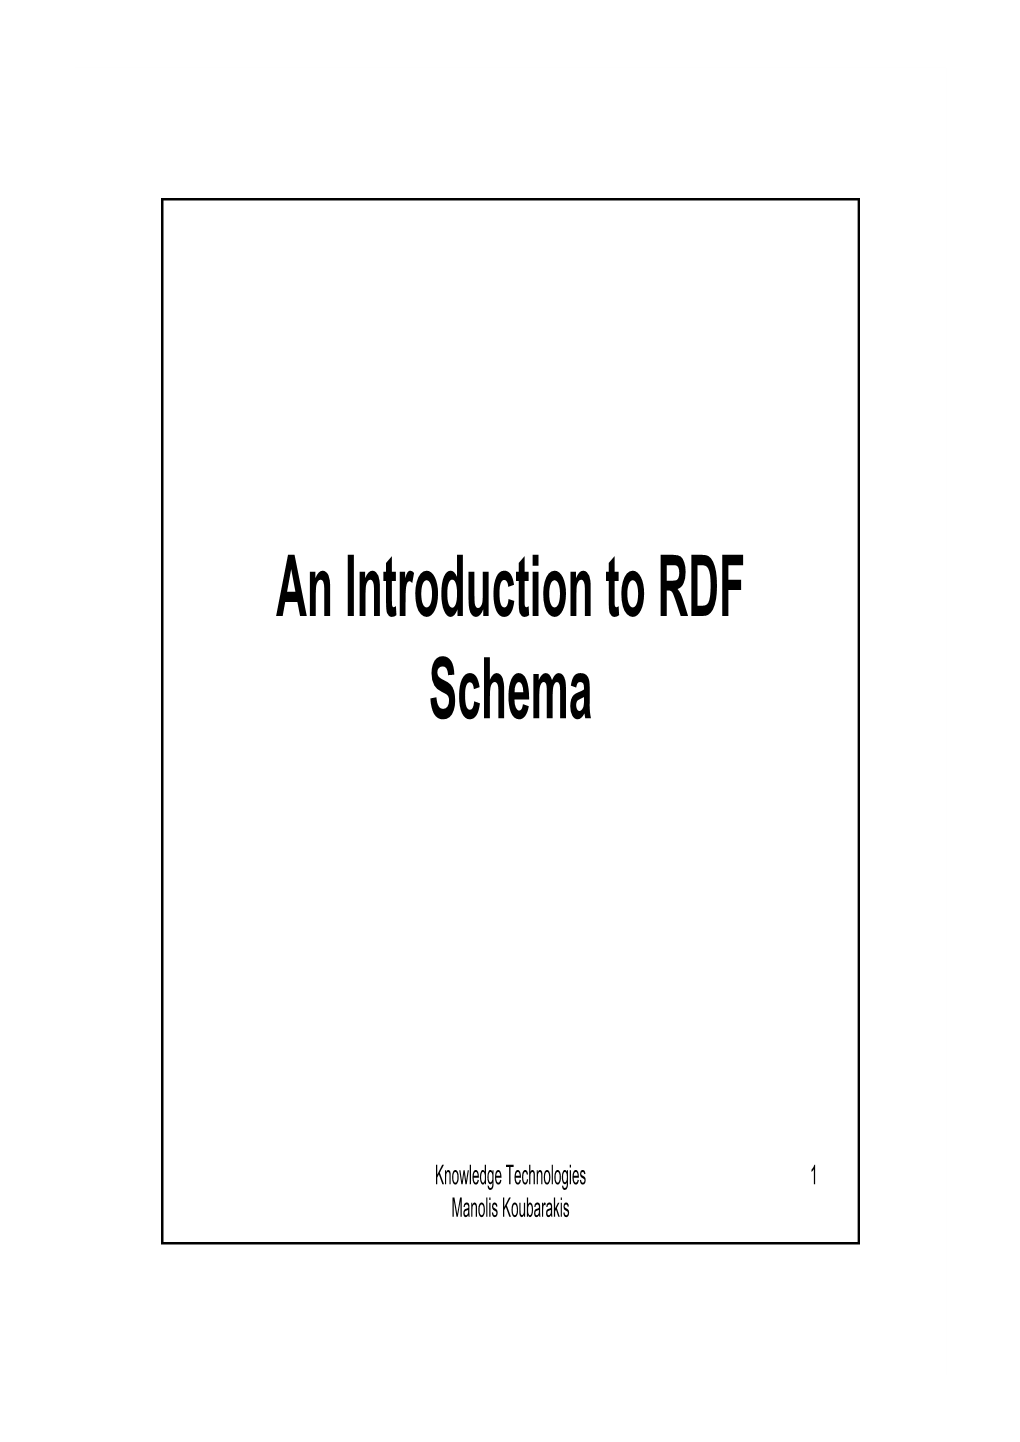 An Introduction to RDF Schema